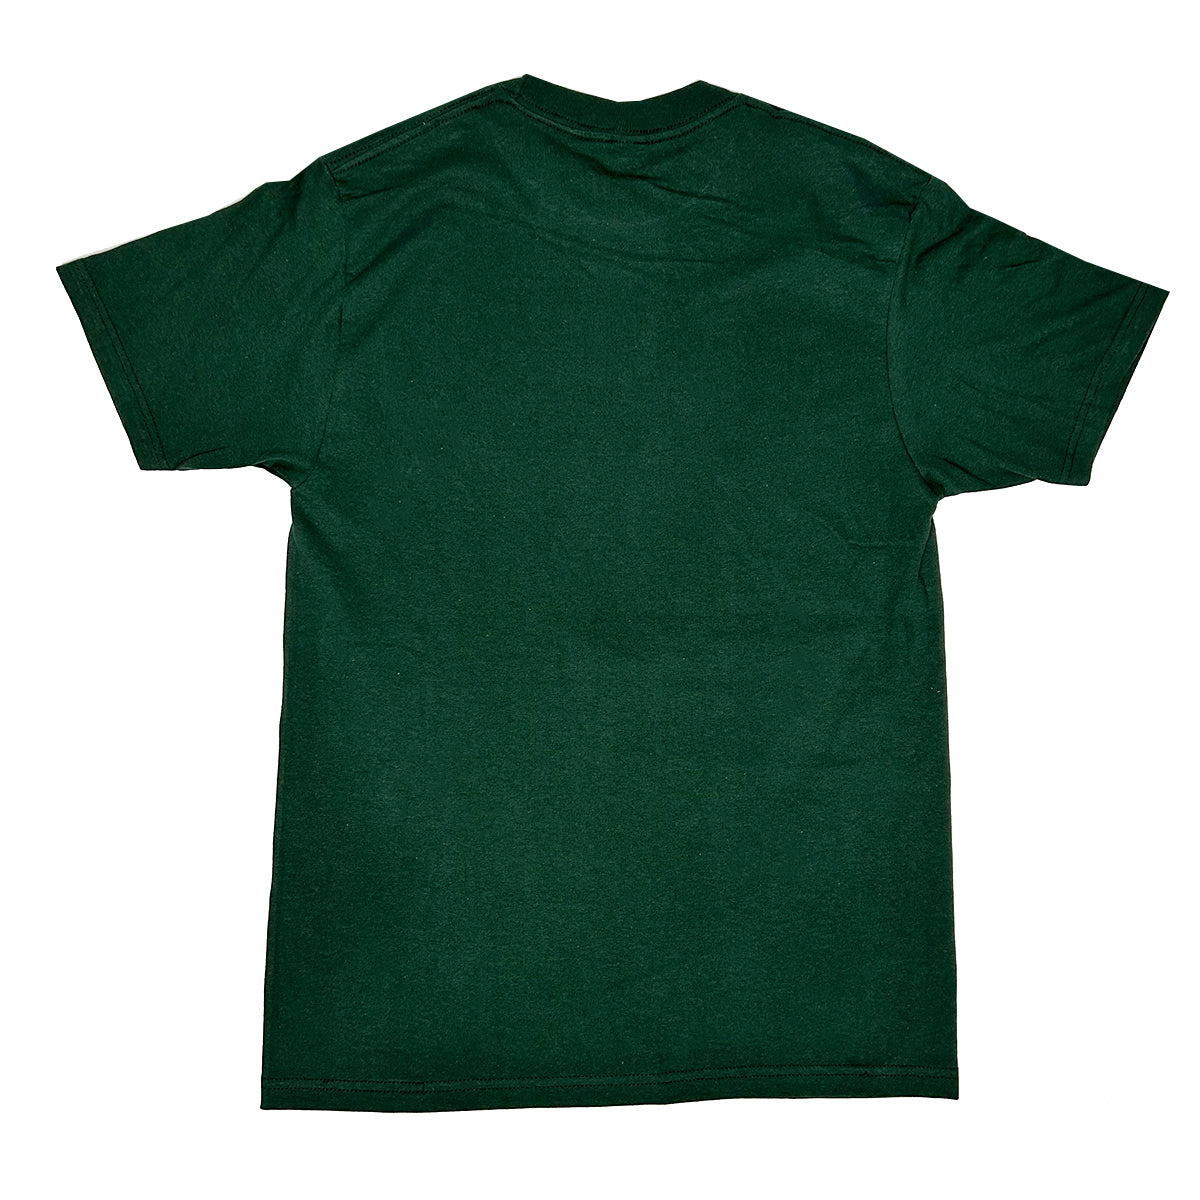 Here For Good Times - Green Pack of 6 Units  1S, 2M, 2L, 1XL